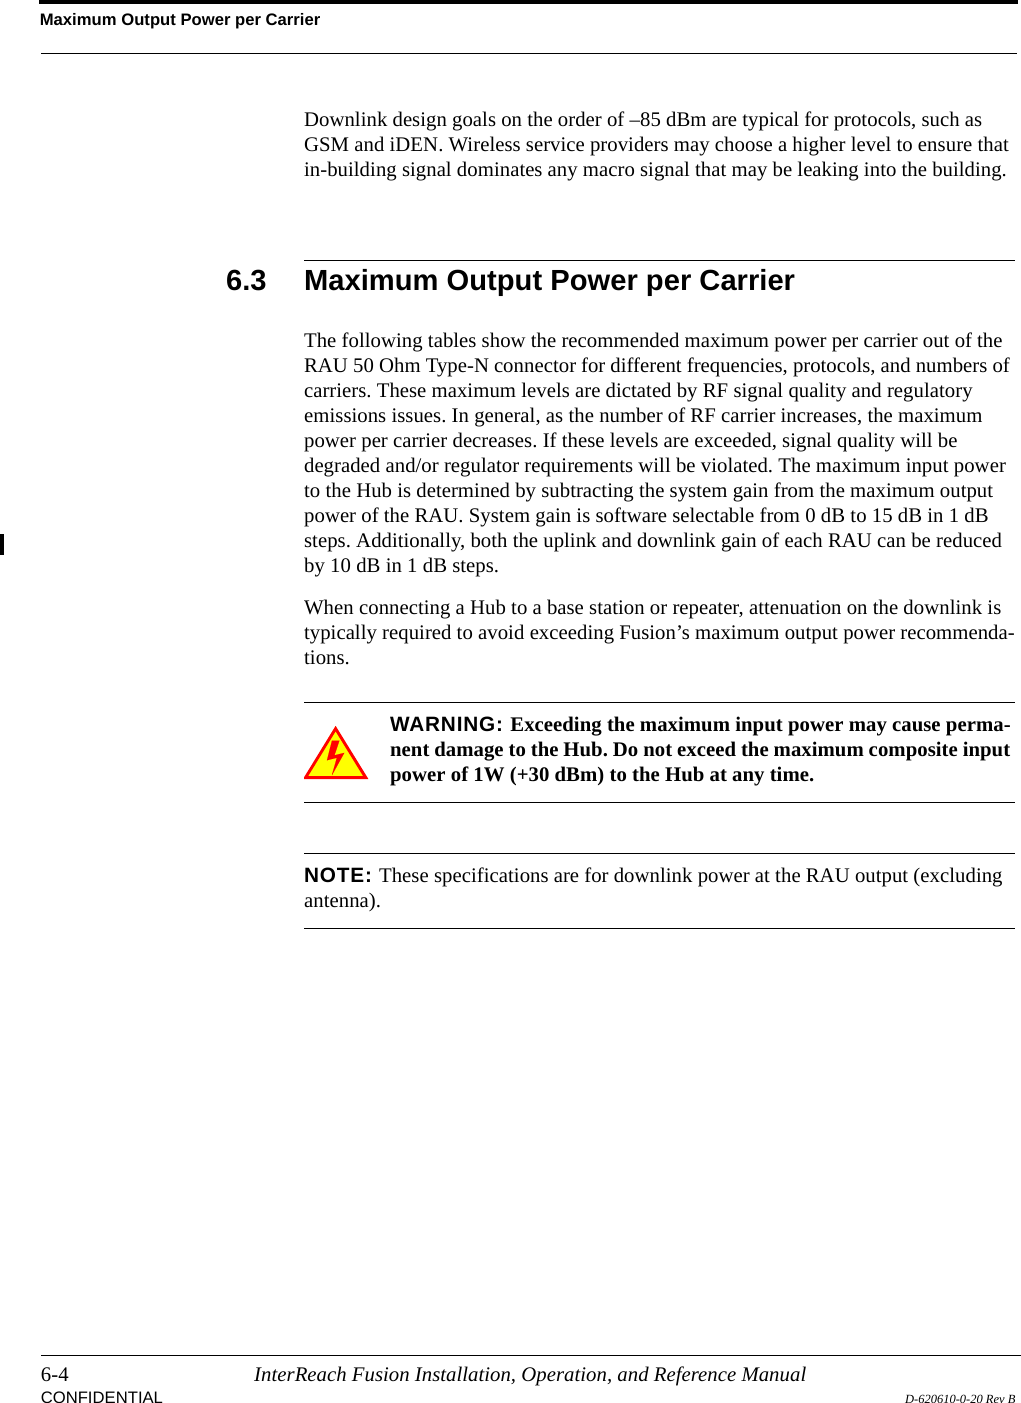 Maximum Output Power per Carrier6-4 InterReach Fusion Installation, Operation, and Reference ManualCONFIDENTIAL D-620610-0-20 Rev BDownlink design goals on the order of –85 dBm are typical for protocols, such as GSM and iDEN. Wireless service providers may choose a higher level to ensure that in-building signal dominates any macro signal that may be leaking into the building.6.3 Maximum Output Power per CarrierThe following tables show the recommended maximum power per carrier out of the RAU 50 Ohm Type-N connector for different frequencies, protocols, and numbers of carriers. These maximum levels are dictated by RF signal quality and regulatory emissions issues. In general, as the number of RF carrier increases, the maximum power per carrier decreases. If these levels are exceeded, signal quality will be degraded and/or regulator requirements will be violated. The maximum input power to the Hub is determined by subtracting the system gain from the maximum output power of the RAU. System gain is software selectable from 0 dB to 15 dB in 1 dB steps. Additionally, both the uplink and downlink gain of each RAU can be reduced by 10 dB in 1 dB steps.When connecting a Hub to a base station or repeater, attenuation on the downlink is typically required to avoid exceeding Fusion’s maximum output power recommenda-tions.WARNING: Exceeding the maximum input power may cause perma-nent damage to the Hub. Do not exceed the maximum composite input power of 1W (+30 dBm) to the Hub at any time.NOTE: These specifications are for downlink power at the RAU output (excluding antenna).